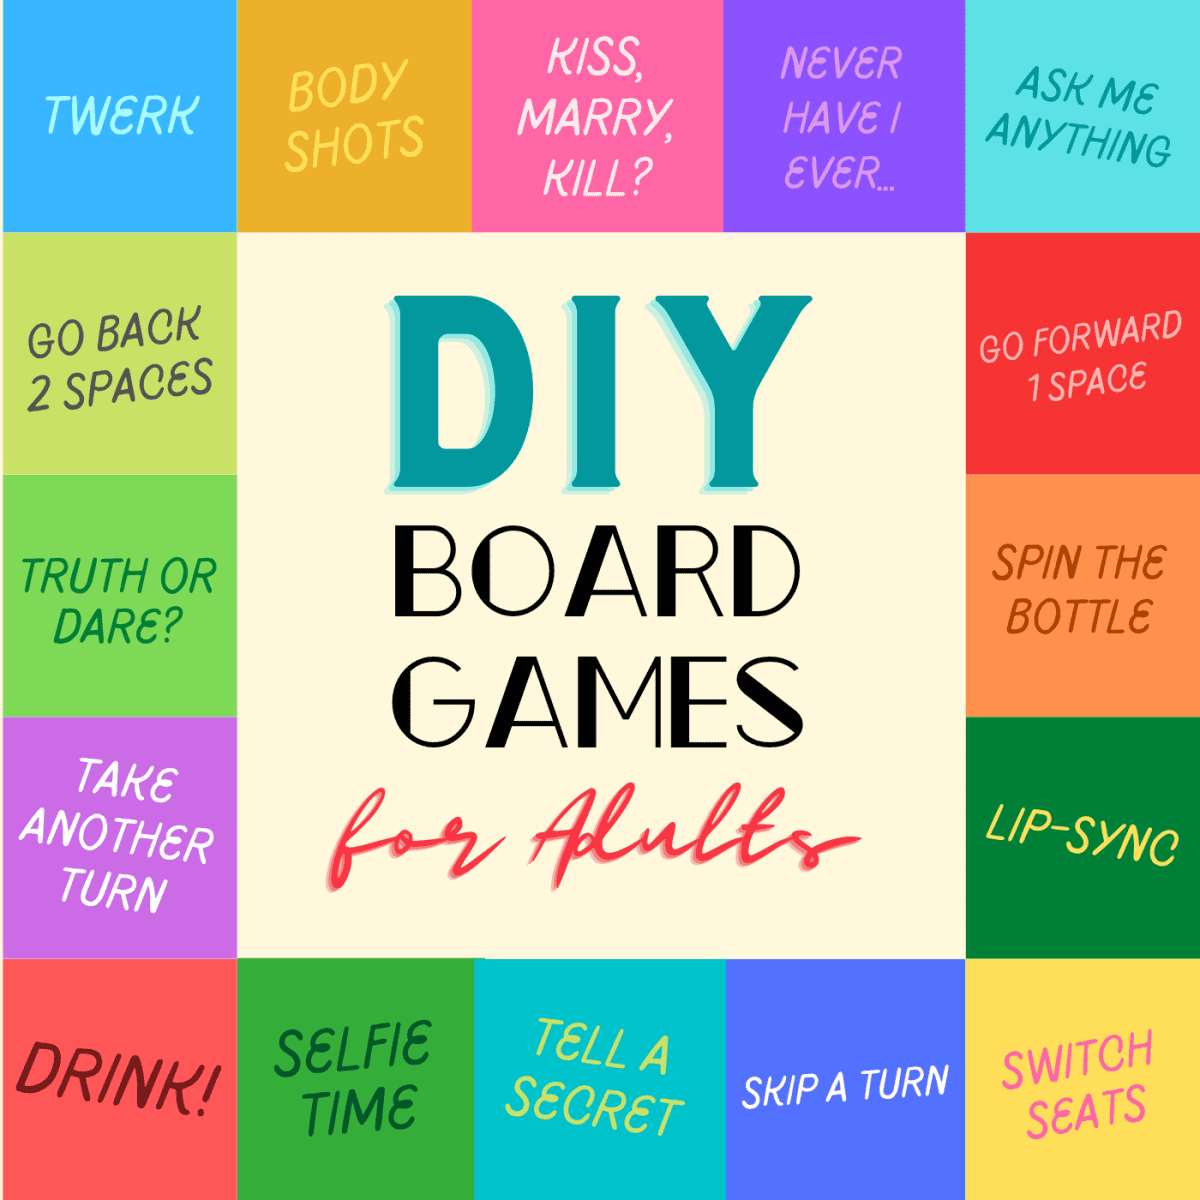 How To Make DIY Picture Game Pieces For Board Games